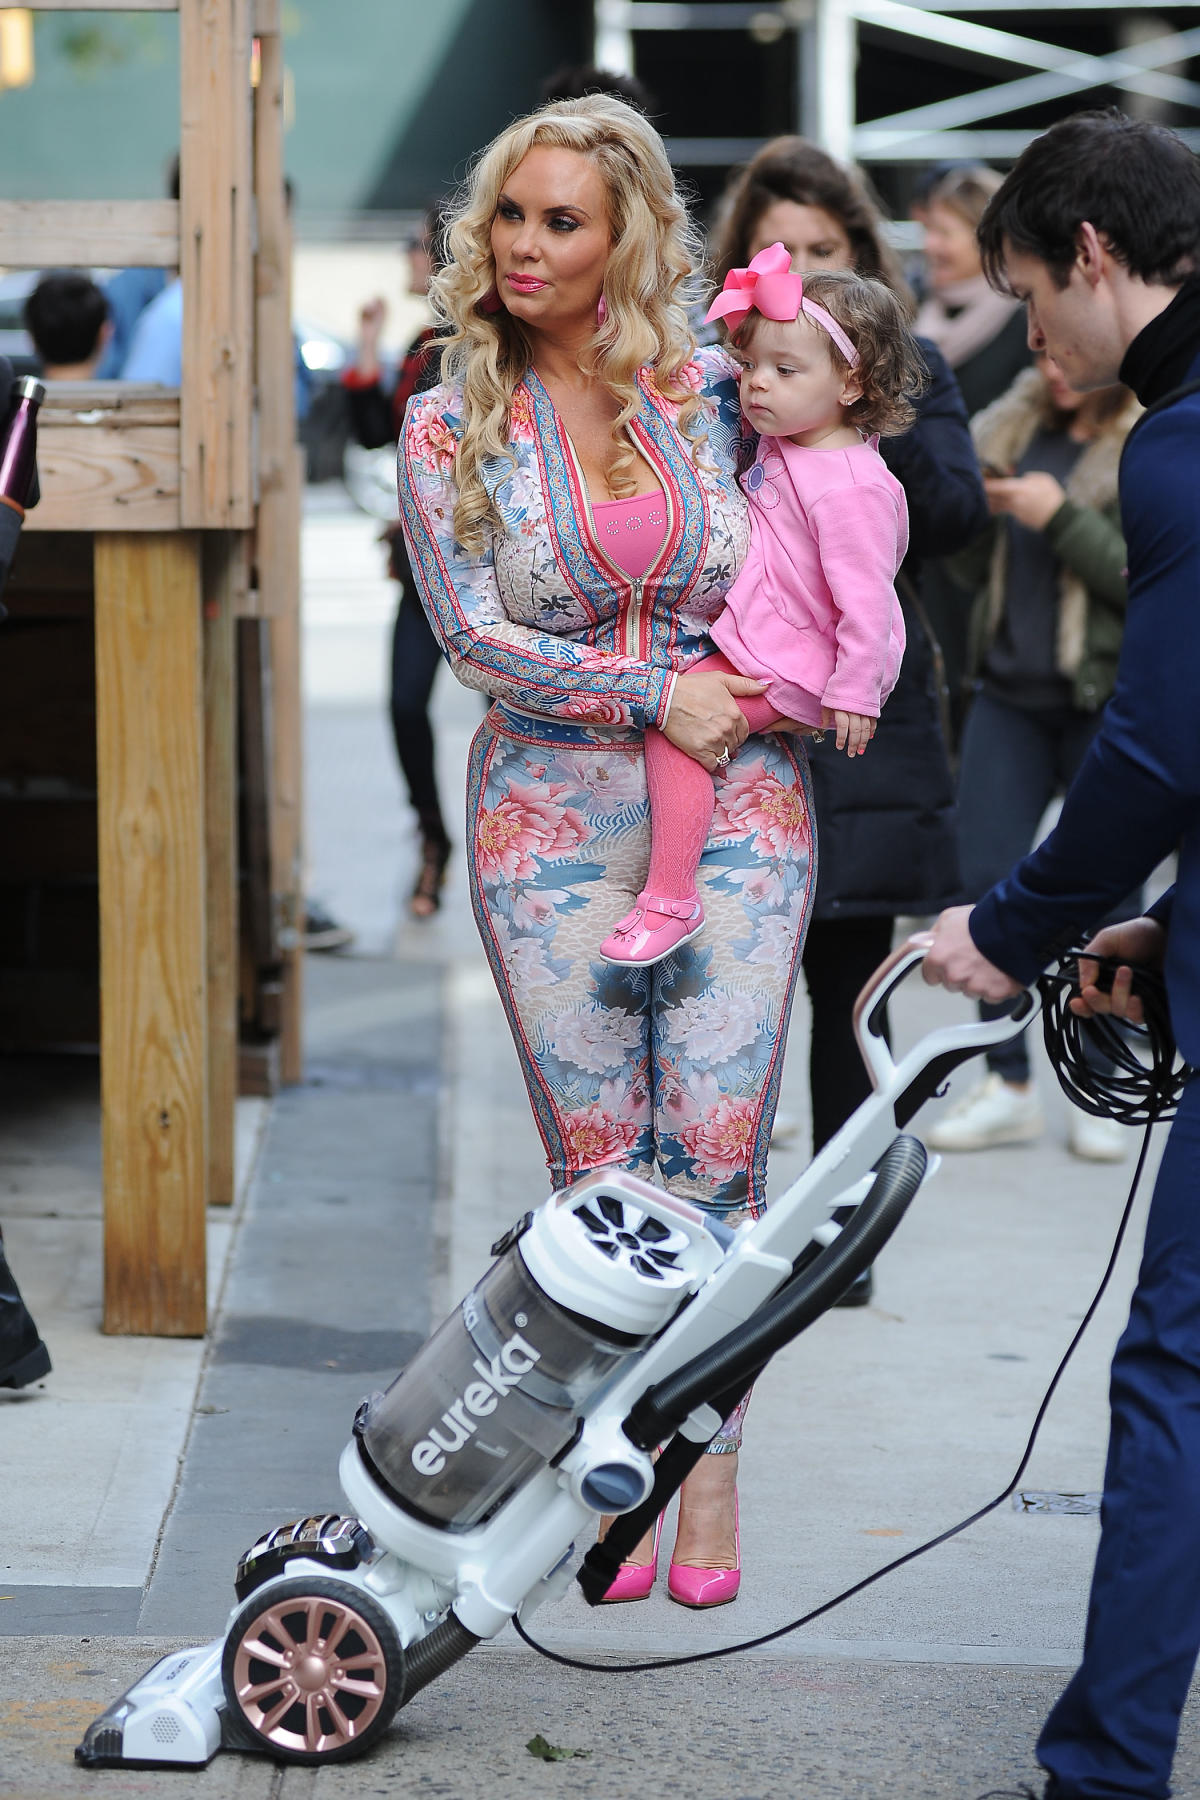 Coco Austin hired a guy to vacuum the street where she walked